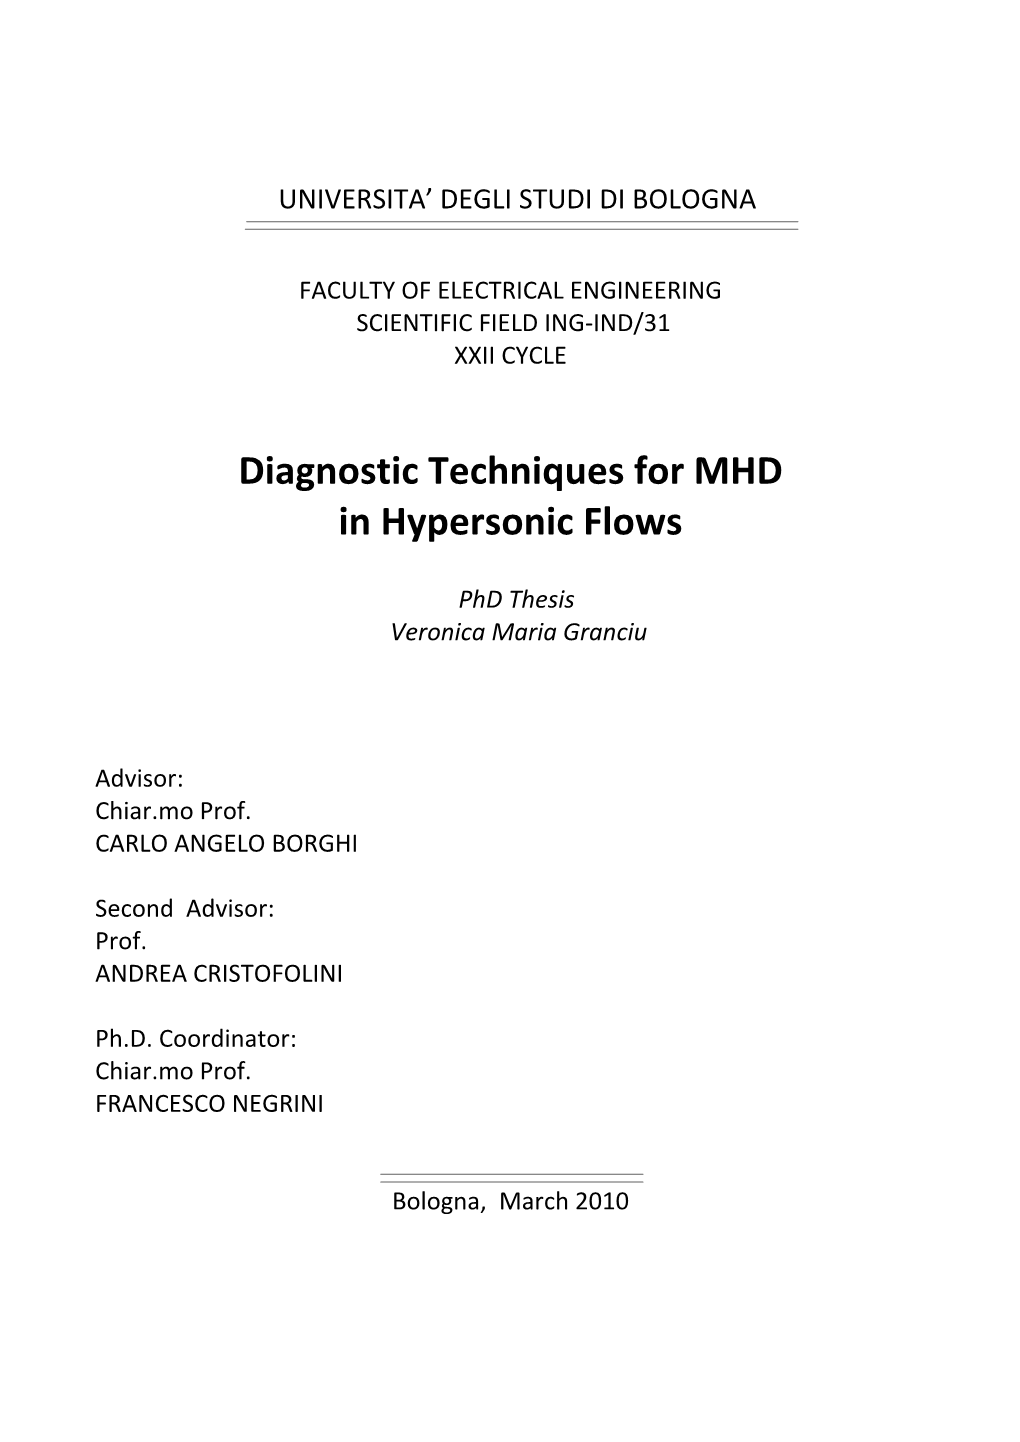 Diagnostic Techniques for MHD in Hypersonic Flows